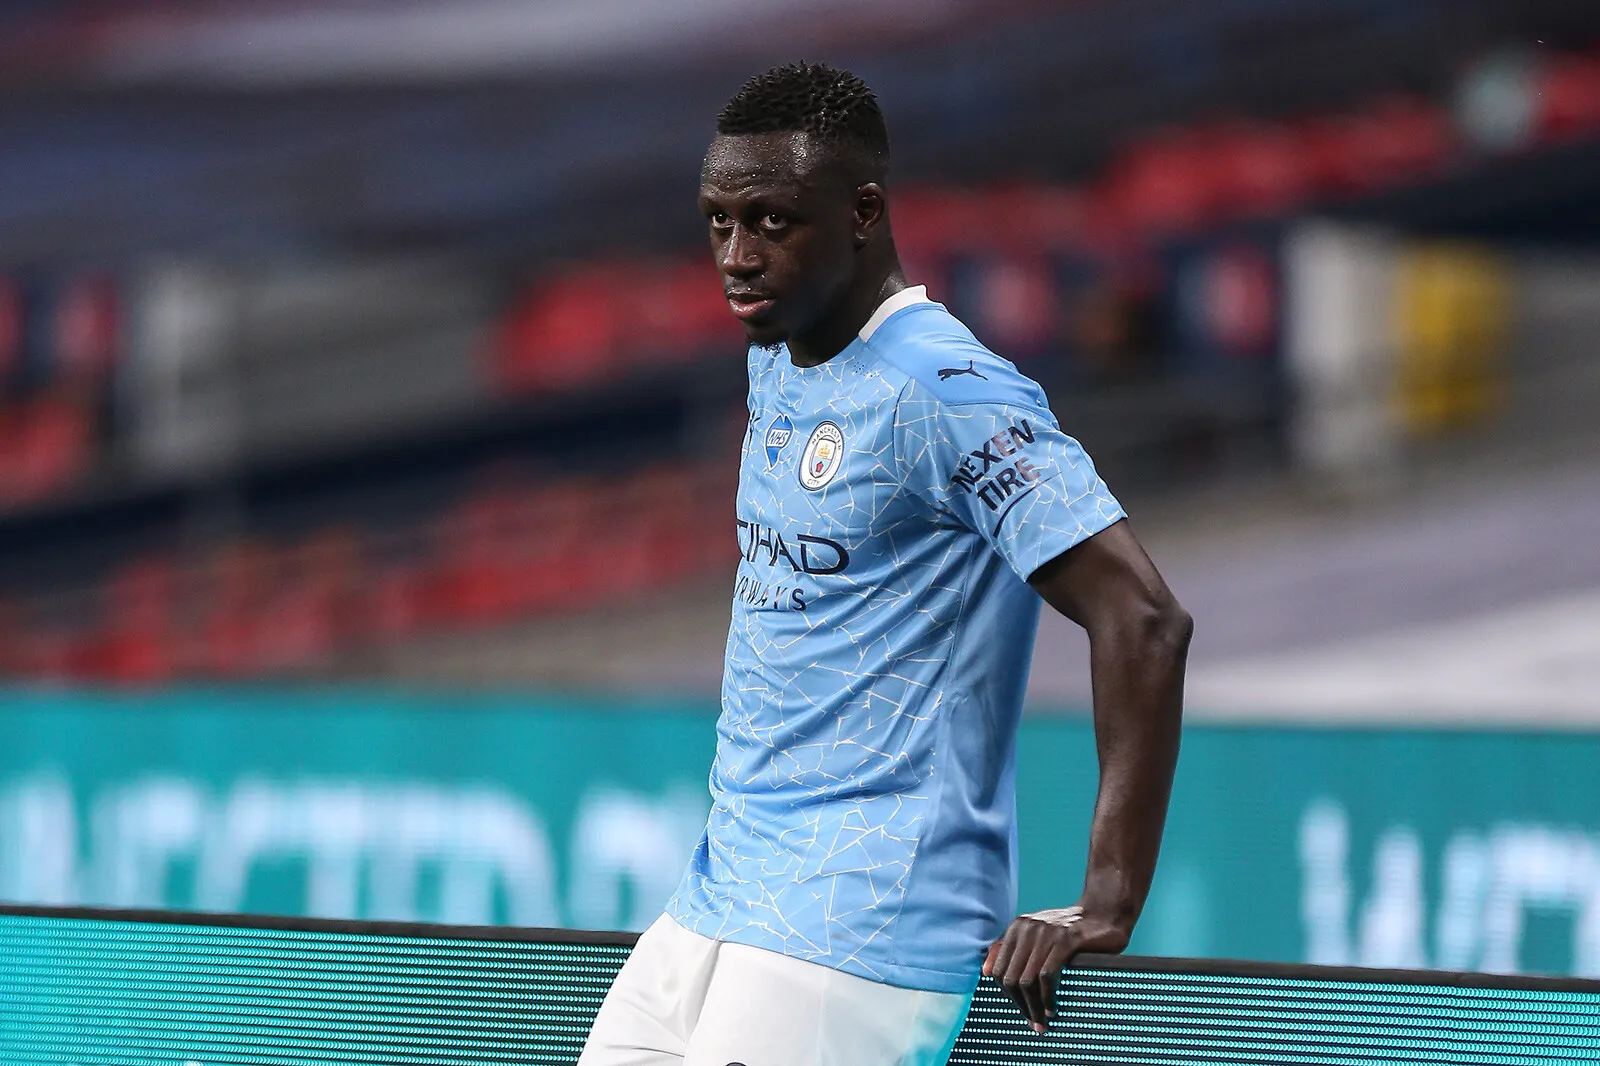 Man City vs Leipzig: Benjamin Mendy still in custody for rape charges against him and will not be available | SportzPoint